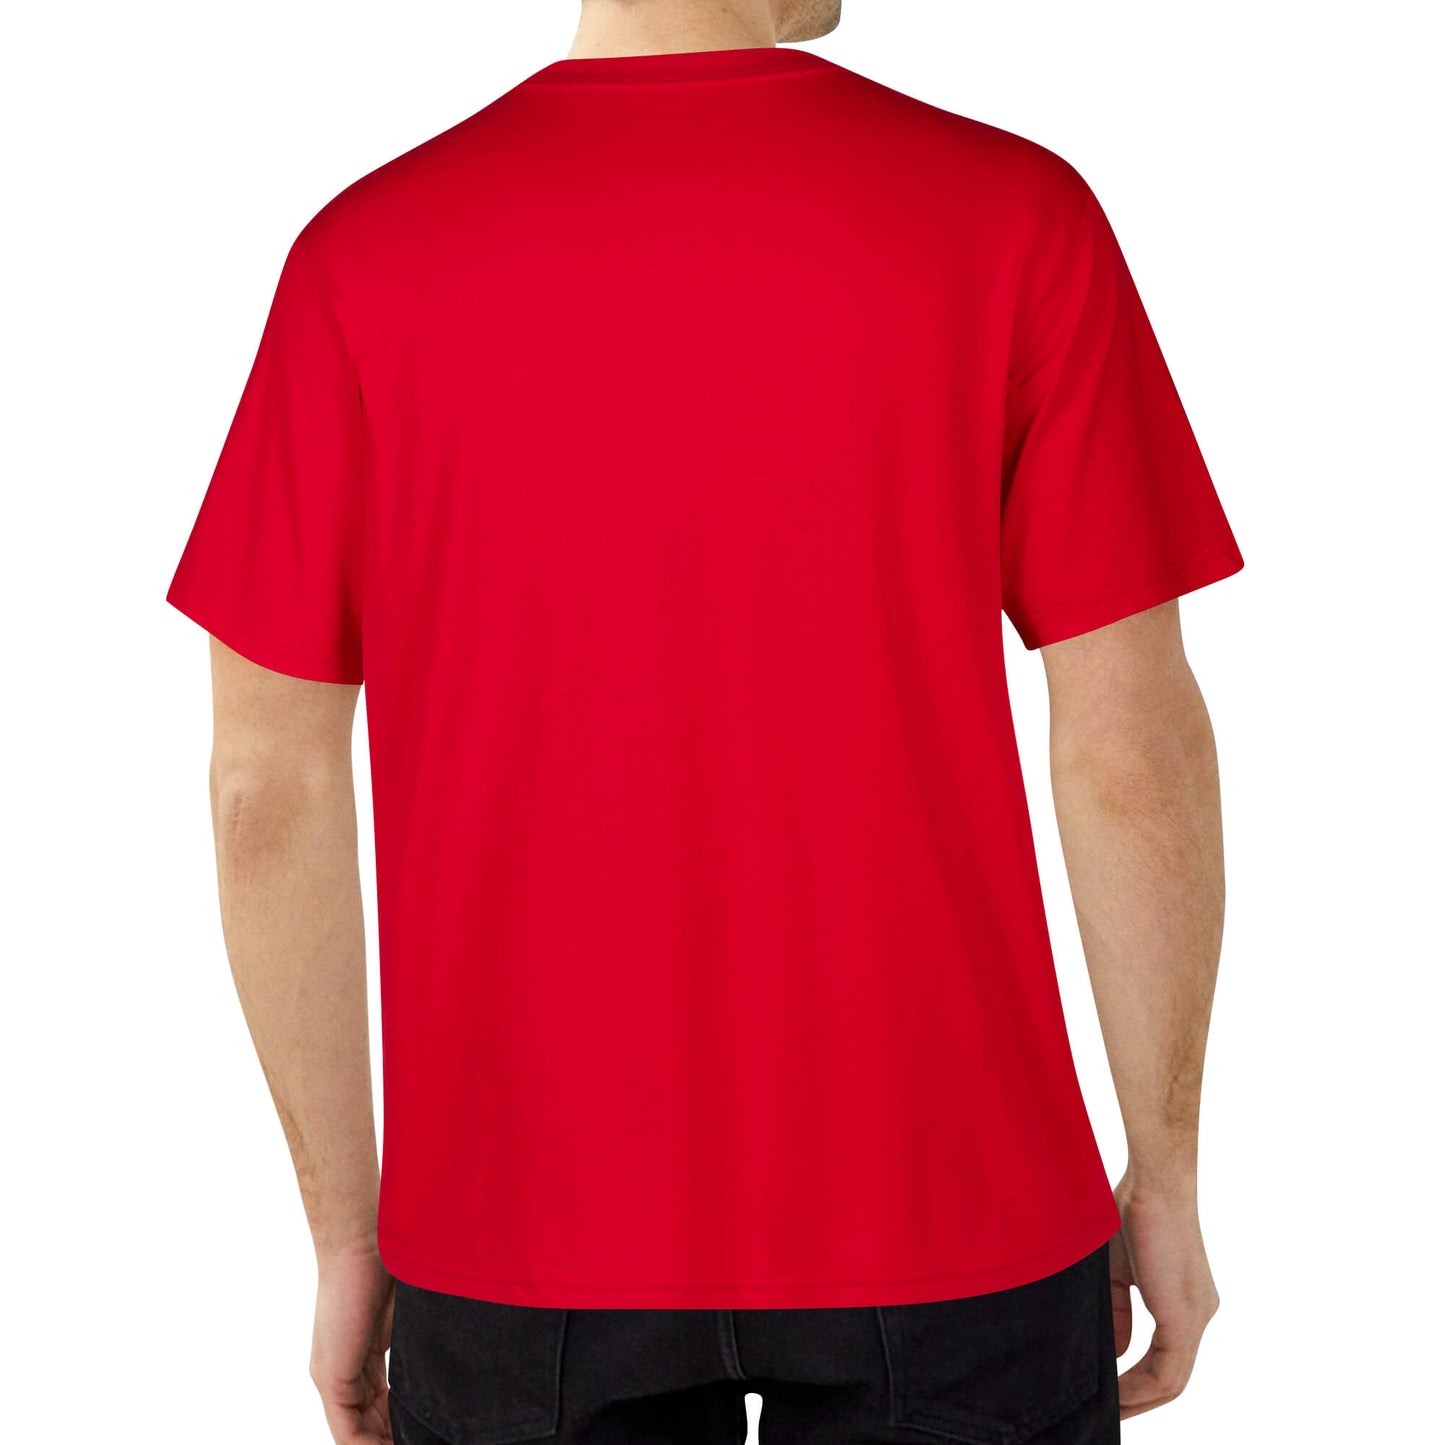 Embroidered Mens Cotton T shirt (Front Design)